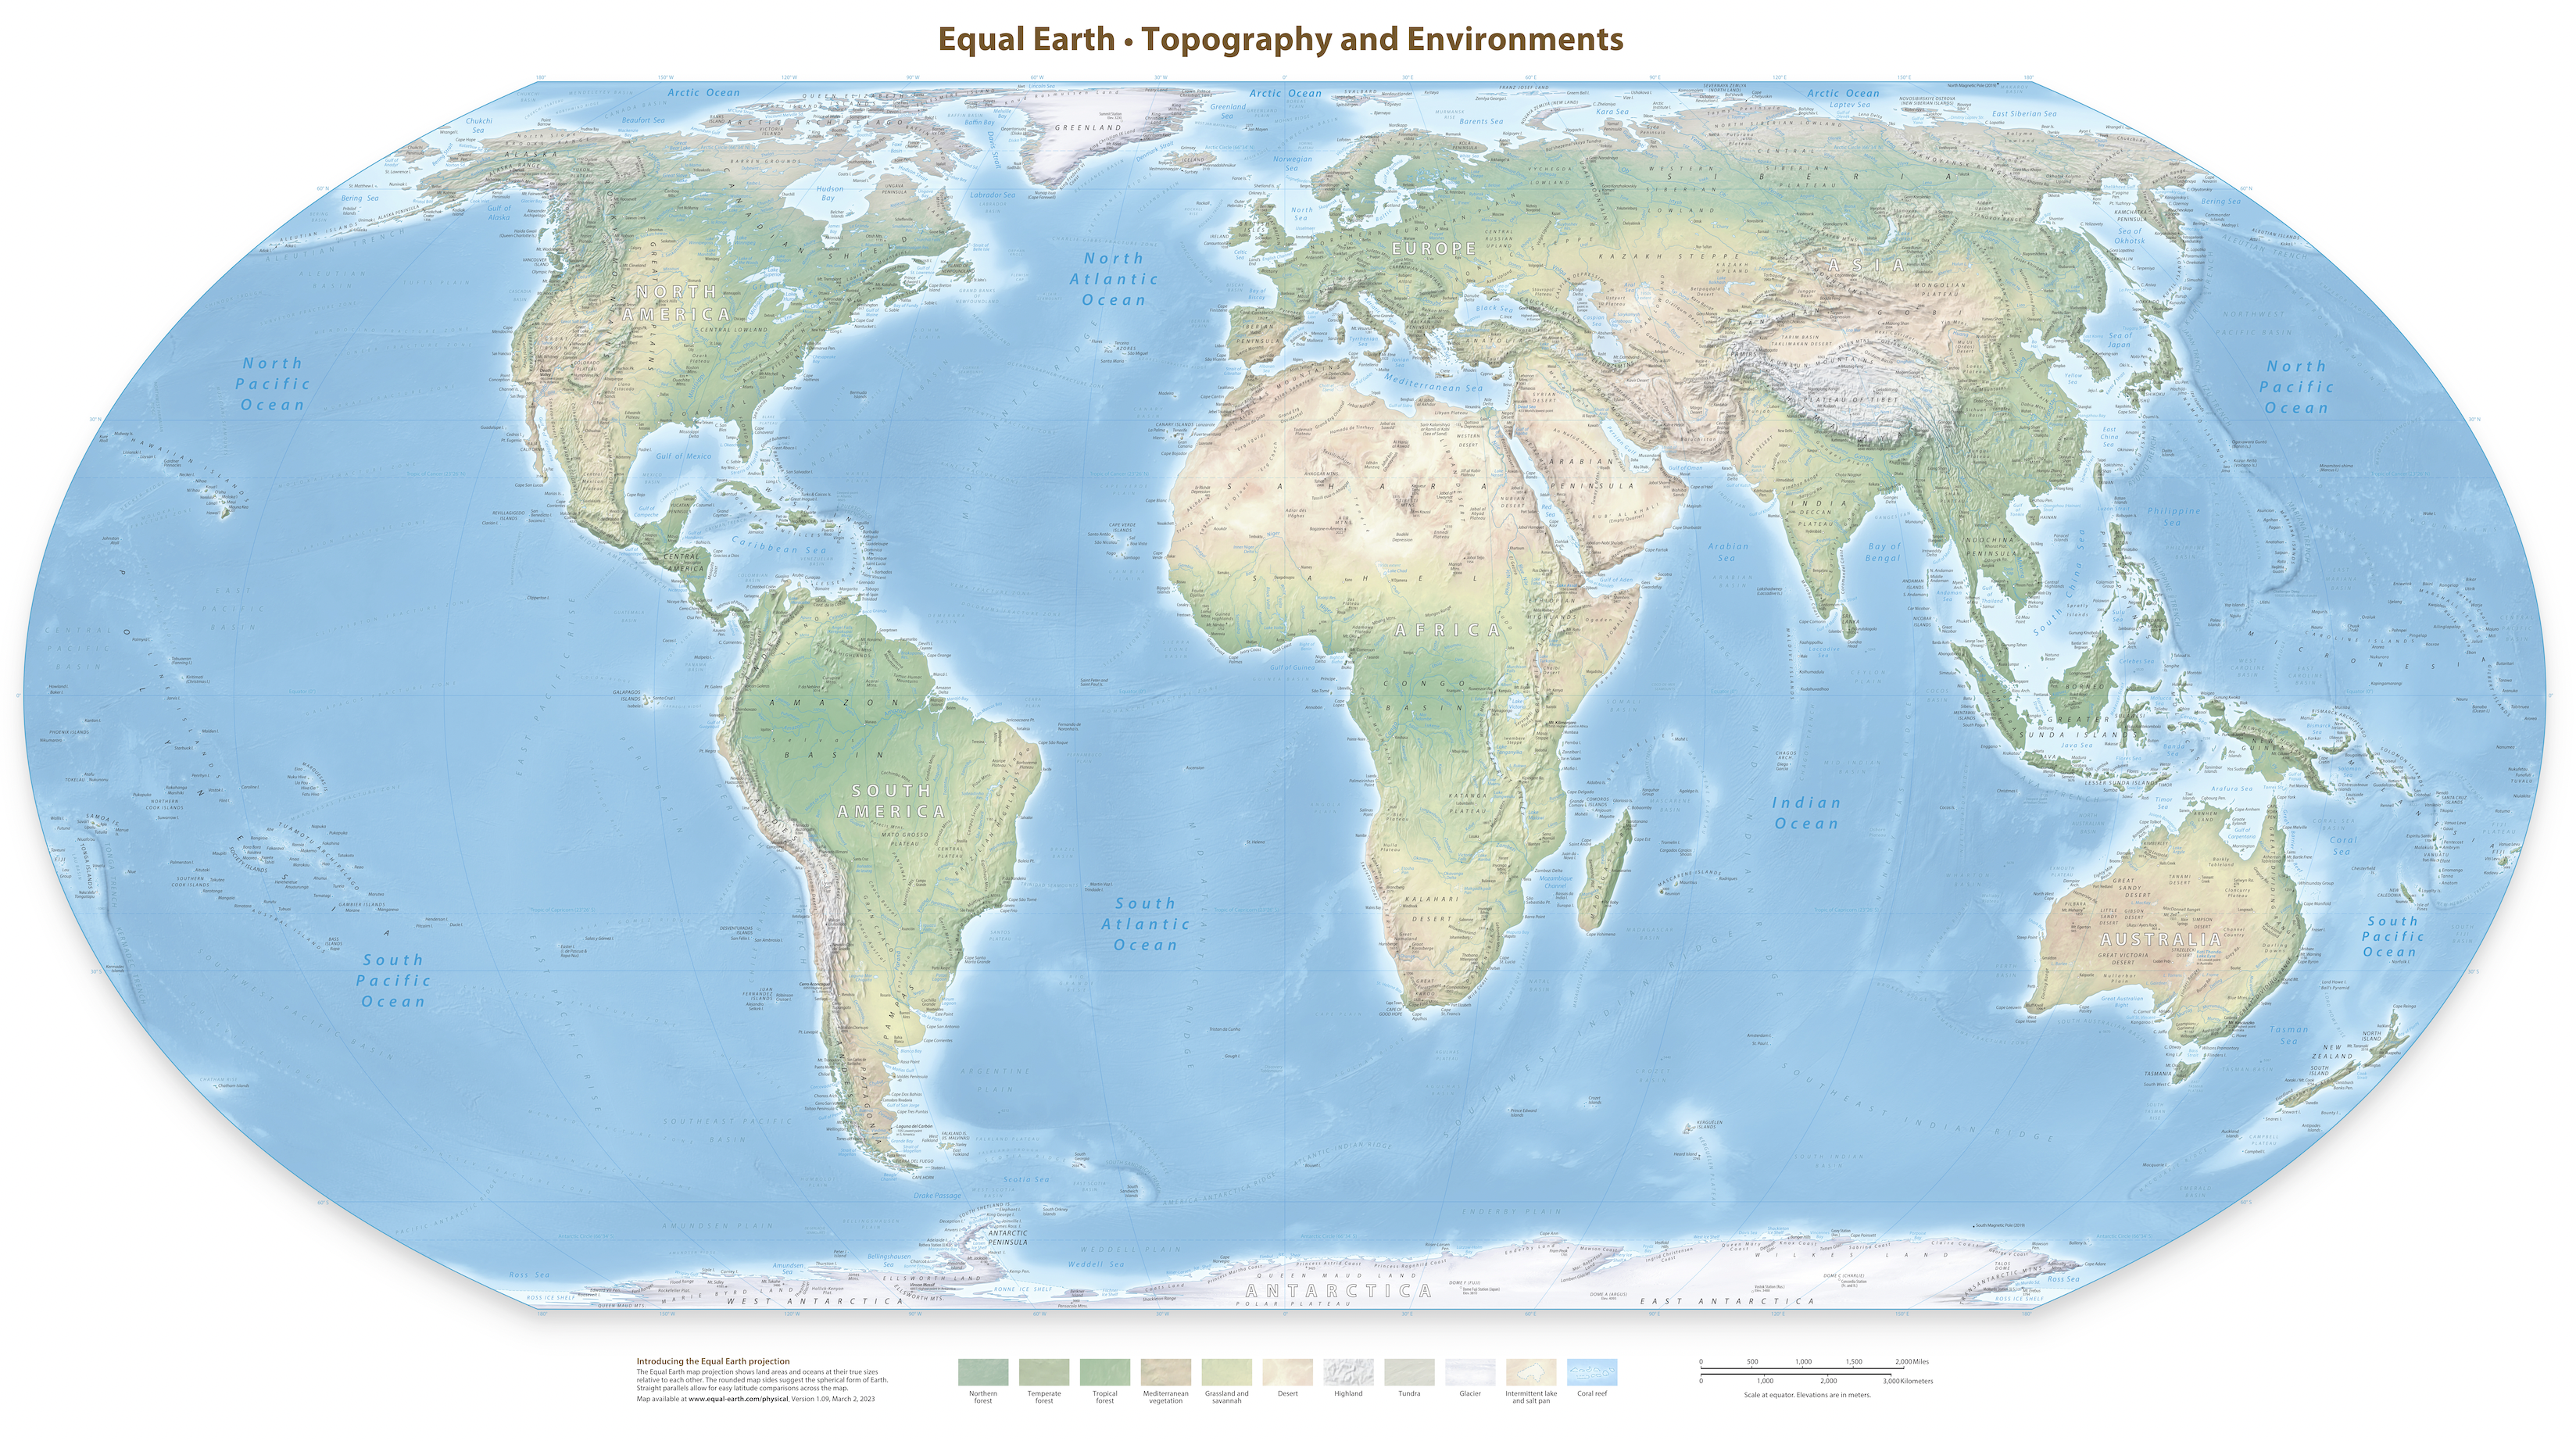 Natural environments and topography map of the world